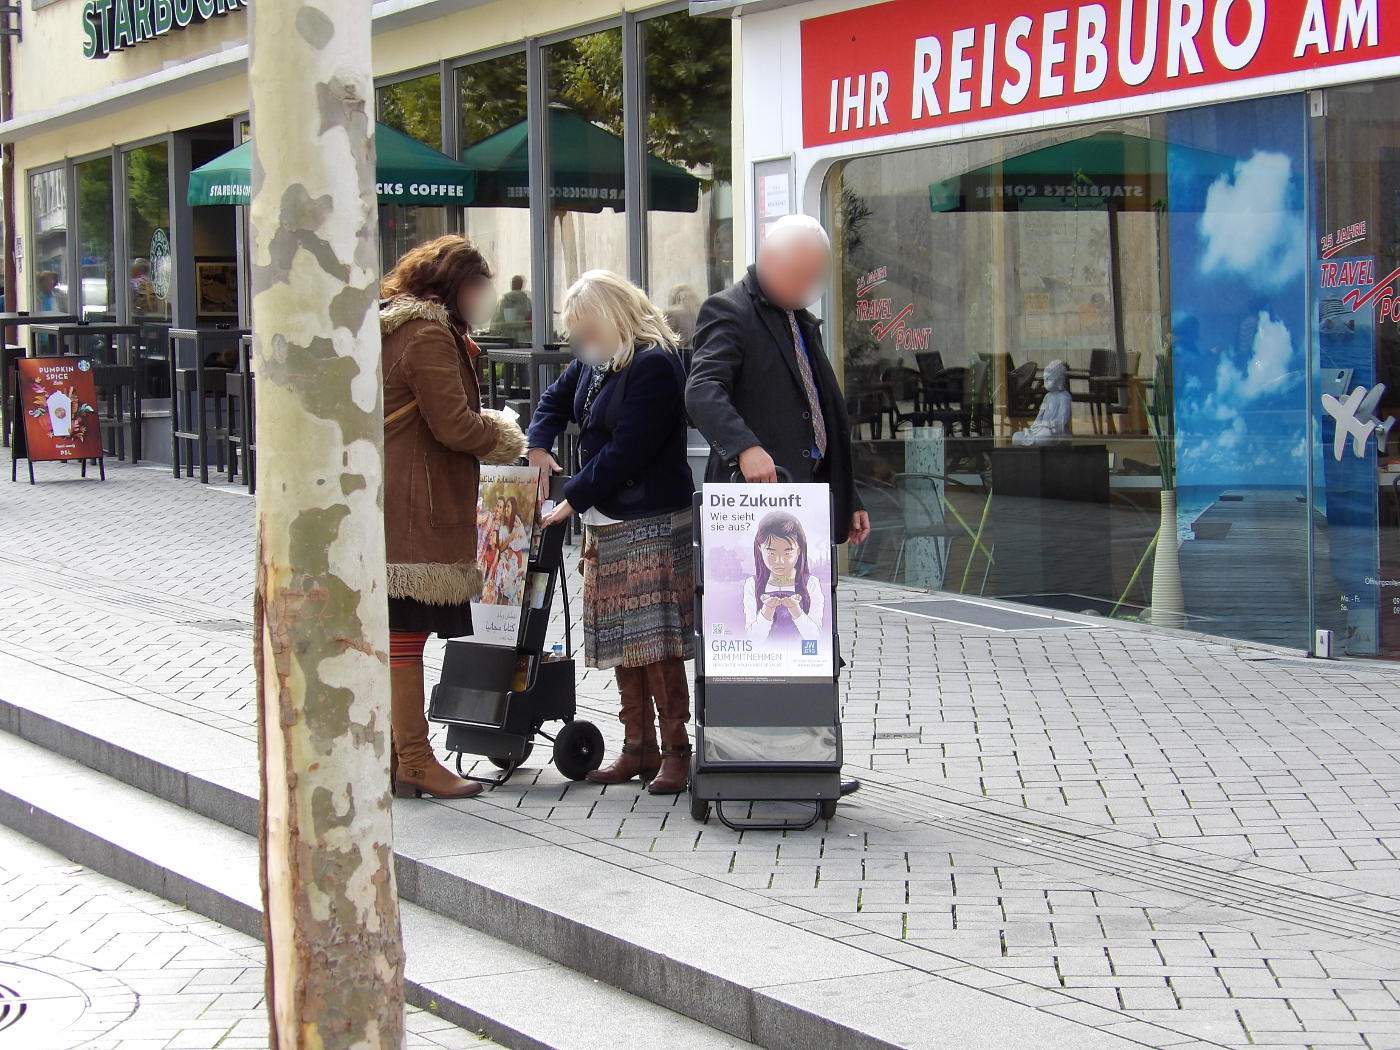 Hail Jehovah – the future owners of Heilbronn: miserable